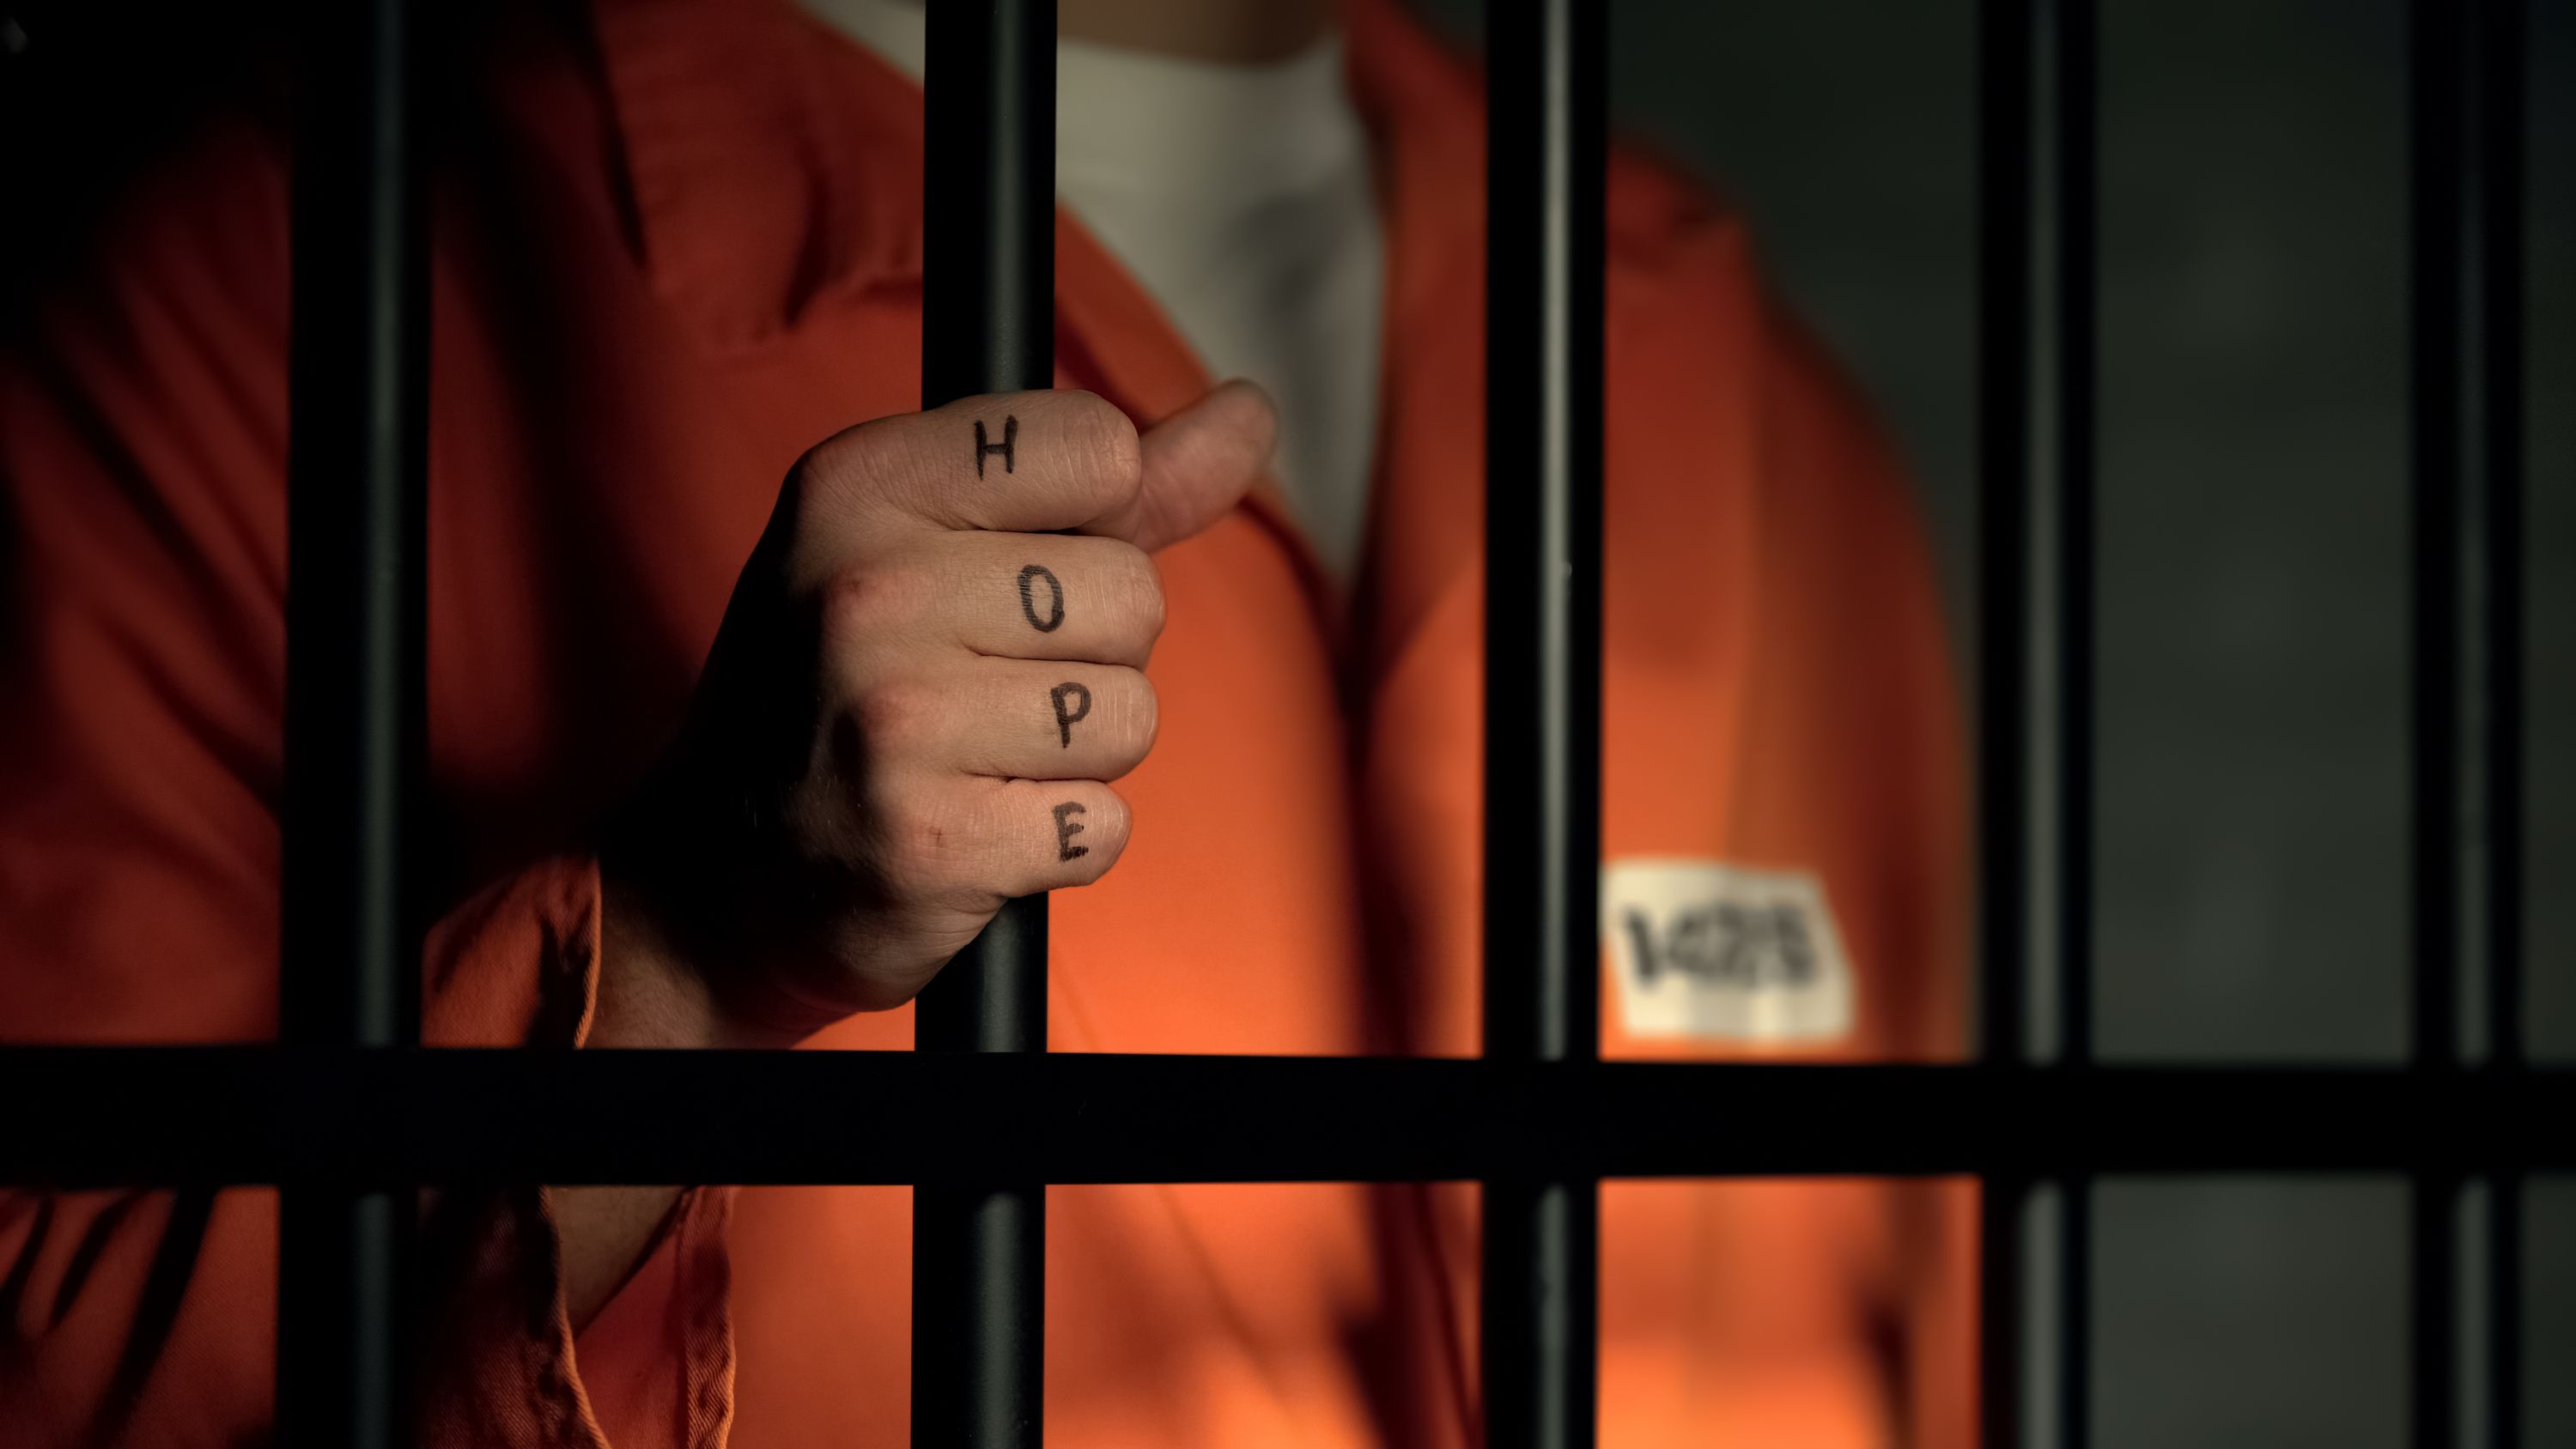 Image: Person in orange with one hand on prison bars, showing letters spelling out H-O-P-E on their knuckles